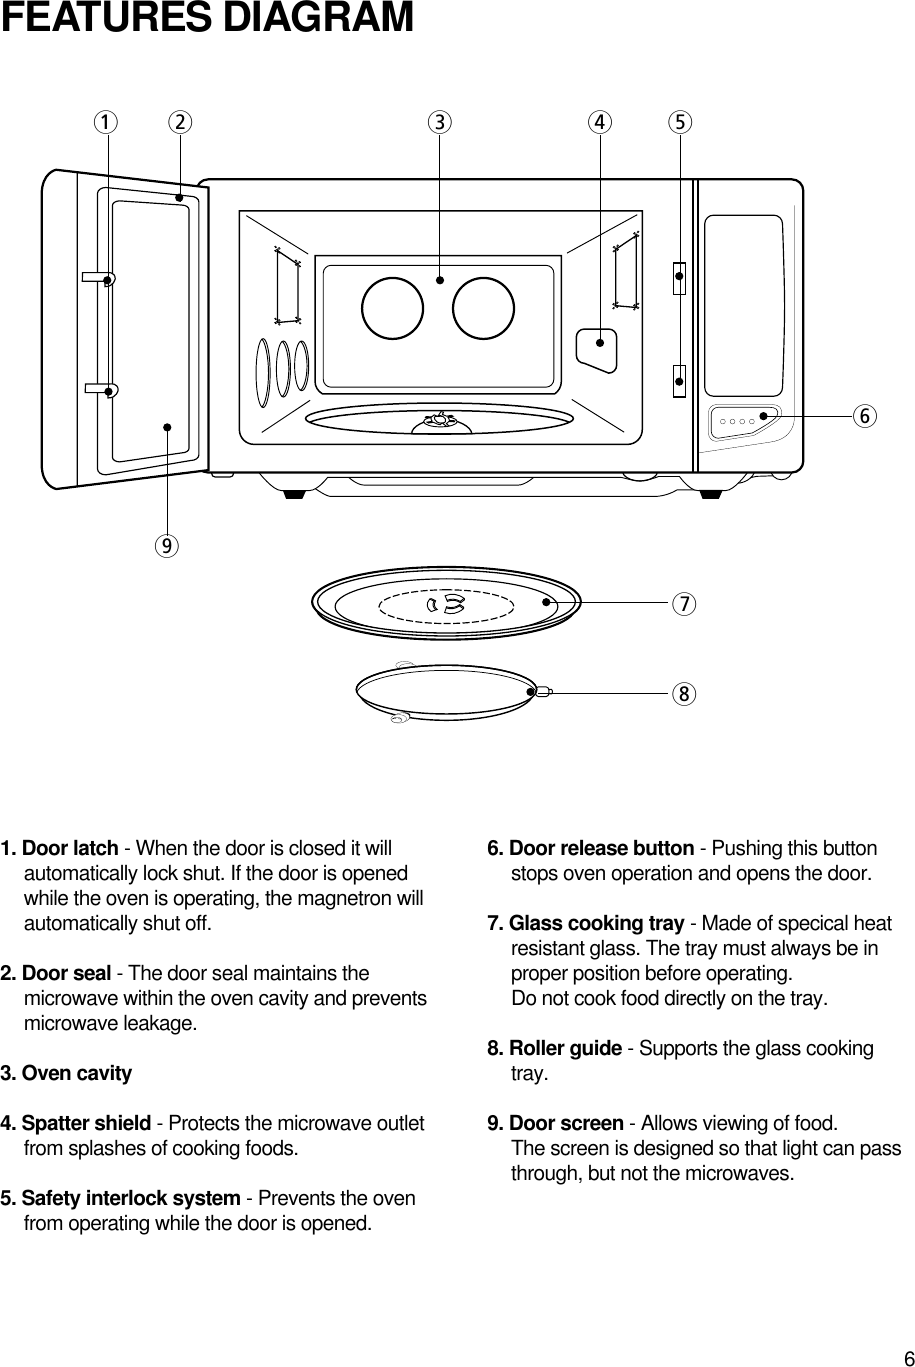 61. Door latch - When the door is closed it willautomatically lock shut. If the door is openedwhile the oven is operating, the magnetron willautomatically shut off.2. Door seal - The door seal maintains themicrowave within the oven cavity and preventsmicrowave leakage.3. Oven cavity4. Spatter shield - Protects the microwave outletfrom splashes of cooking foods.5. Safety interlock system - Prevents the ovenfrom operating while the door is opened.6. Door release button - Pushing this buttonstops oven operation and opens the door.7. Glass cooking tray - Made of specical heatresistant glass. The tray must always be inproper position before operating. Do not cook food directly on the tray.8. Roller guide - Supports the glass cookingtray.9. Door screen - Allows viewing of food. The screen is designed so that light can passthrough, but not the microwaves.FEATURES DIAGRAM129783456